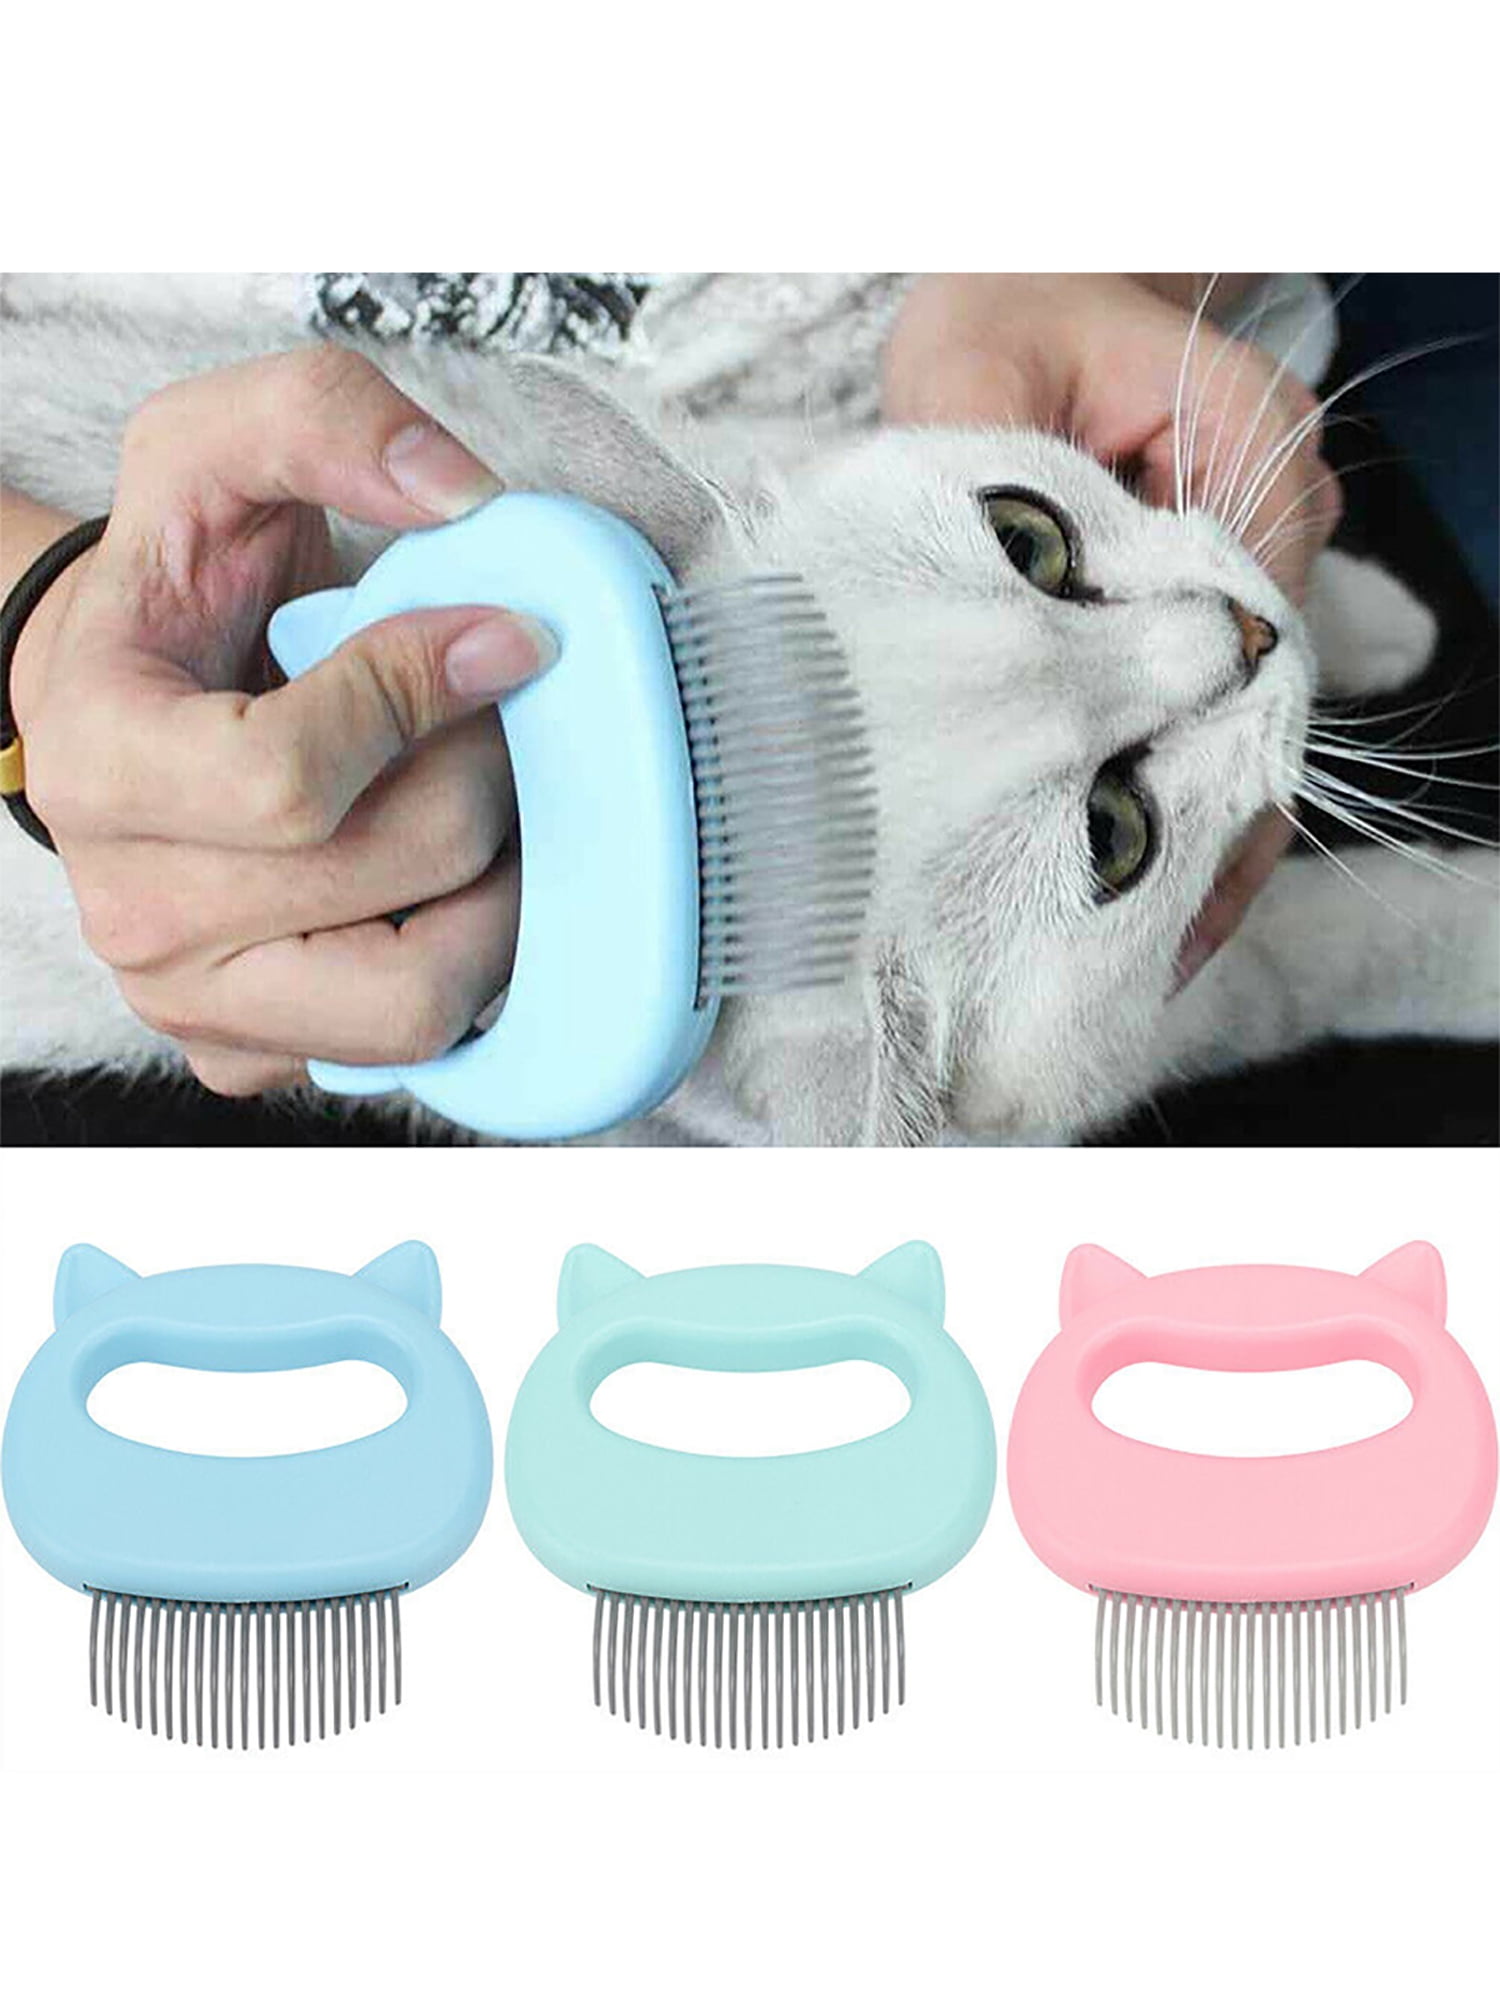 Soft Handle Cat Dog Remove Hair Brush Shell Claw Massage Comb Grooming Tool,Blue LANWF Pet Grooming Shell Comb 